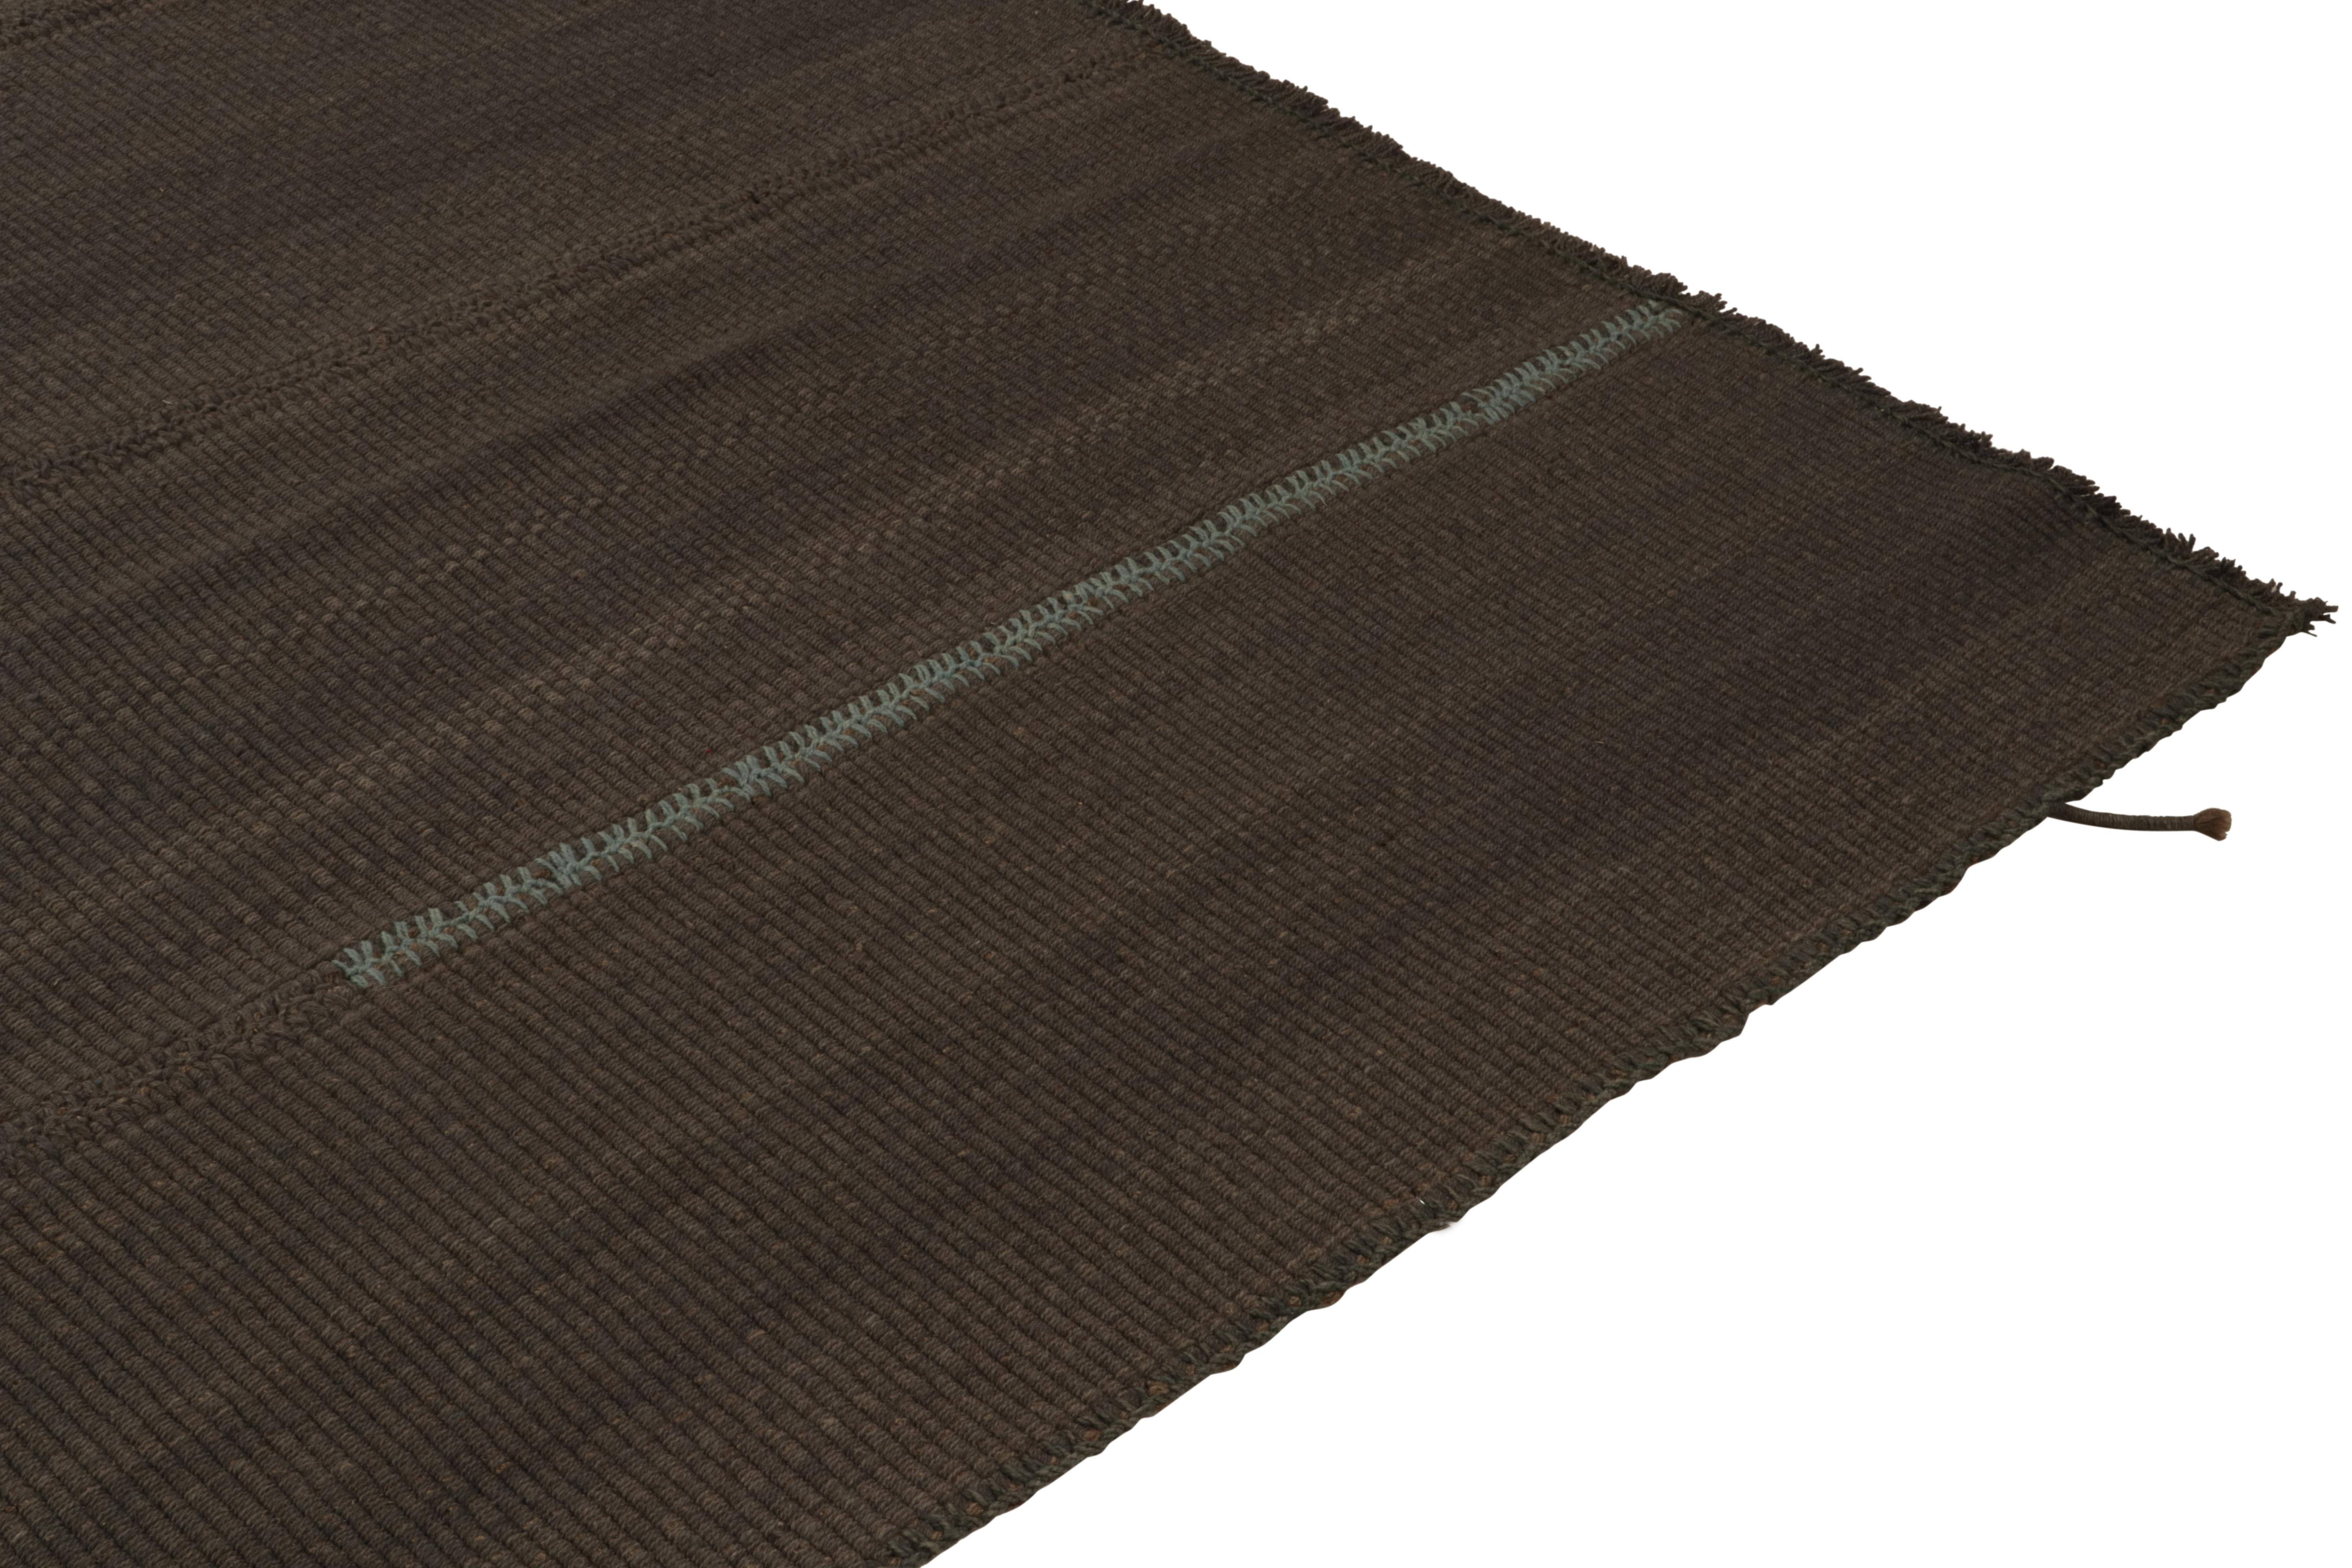 Afghan Rug & Kilim’s Contemporary Oversized Kilim in Brown Muted Stripes, Blue Accents For Sale